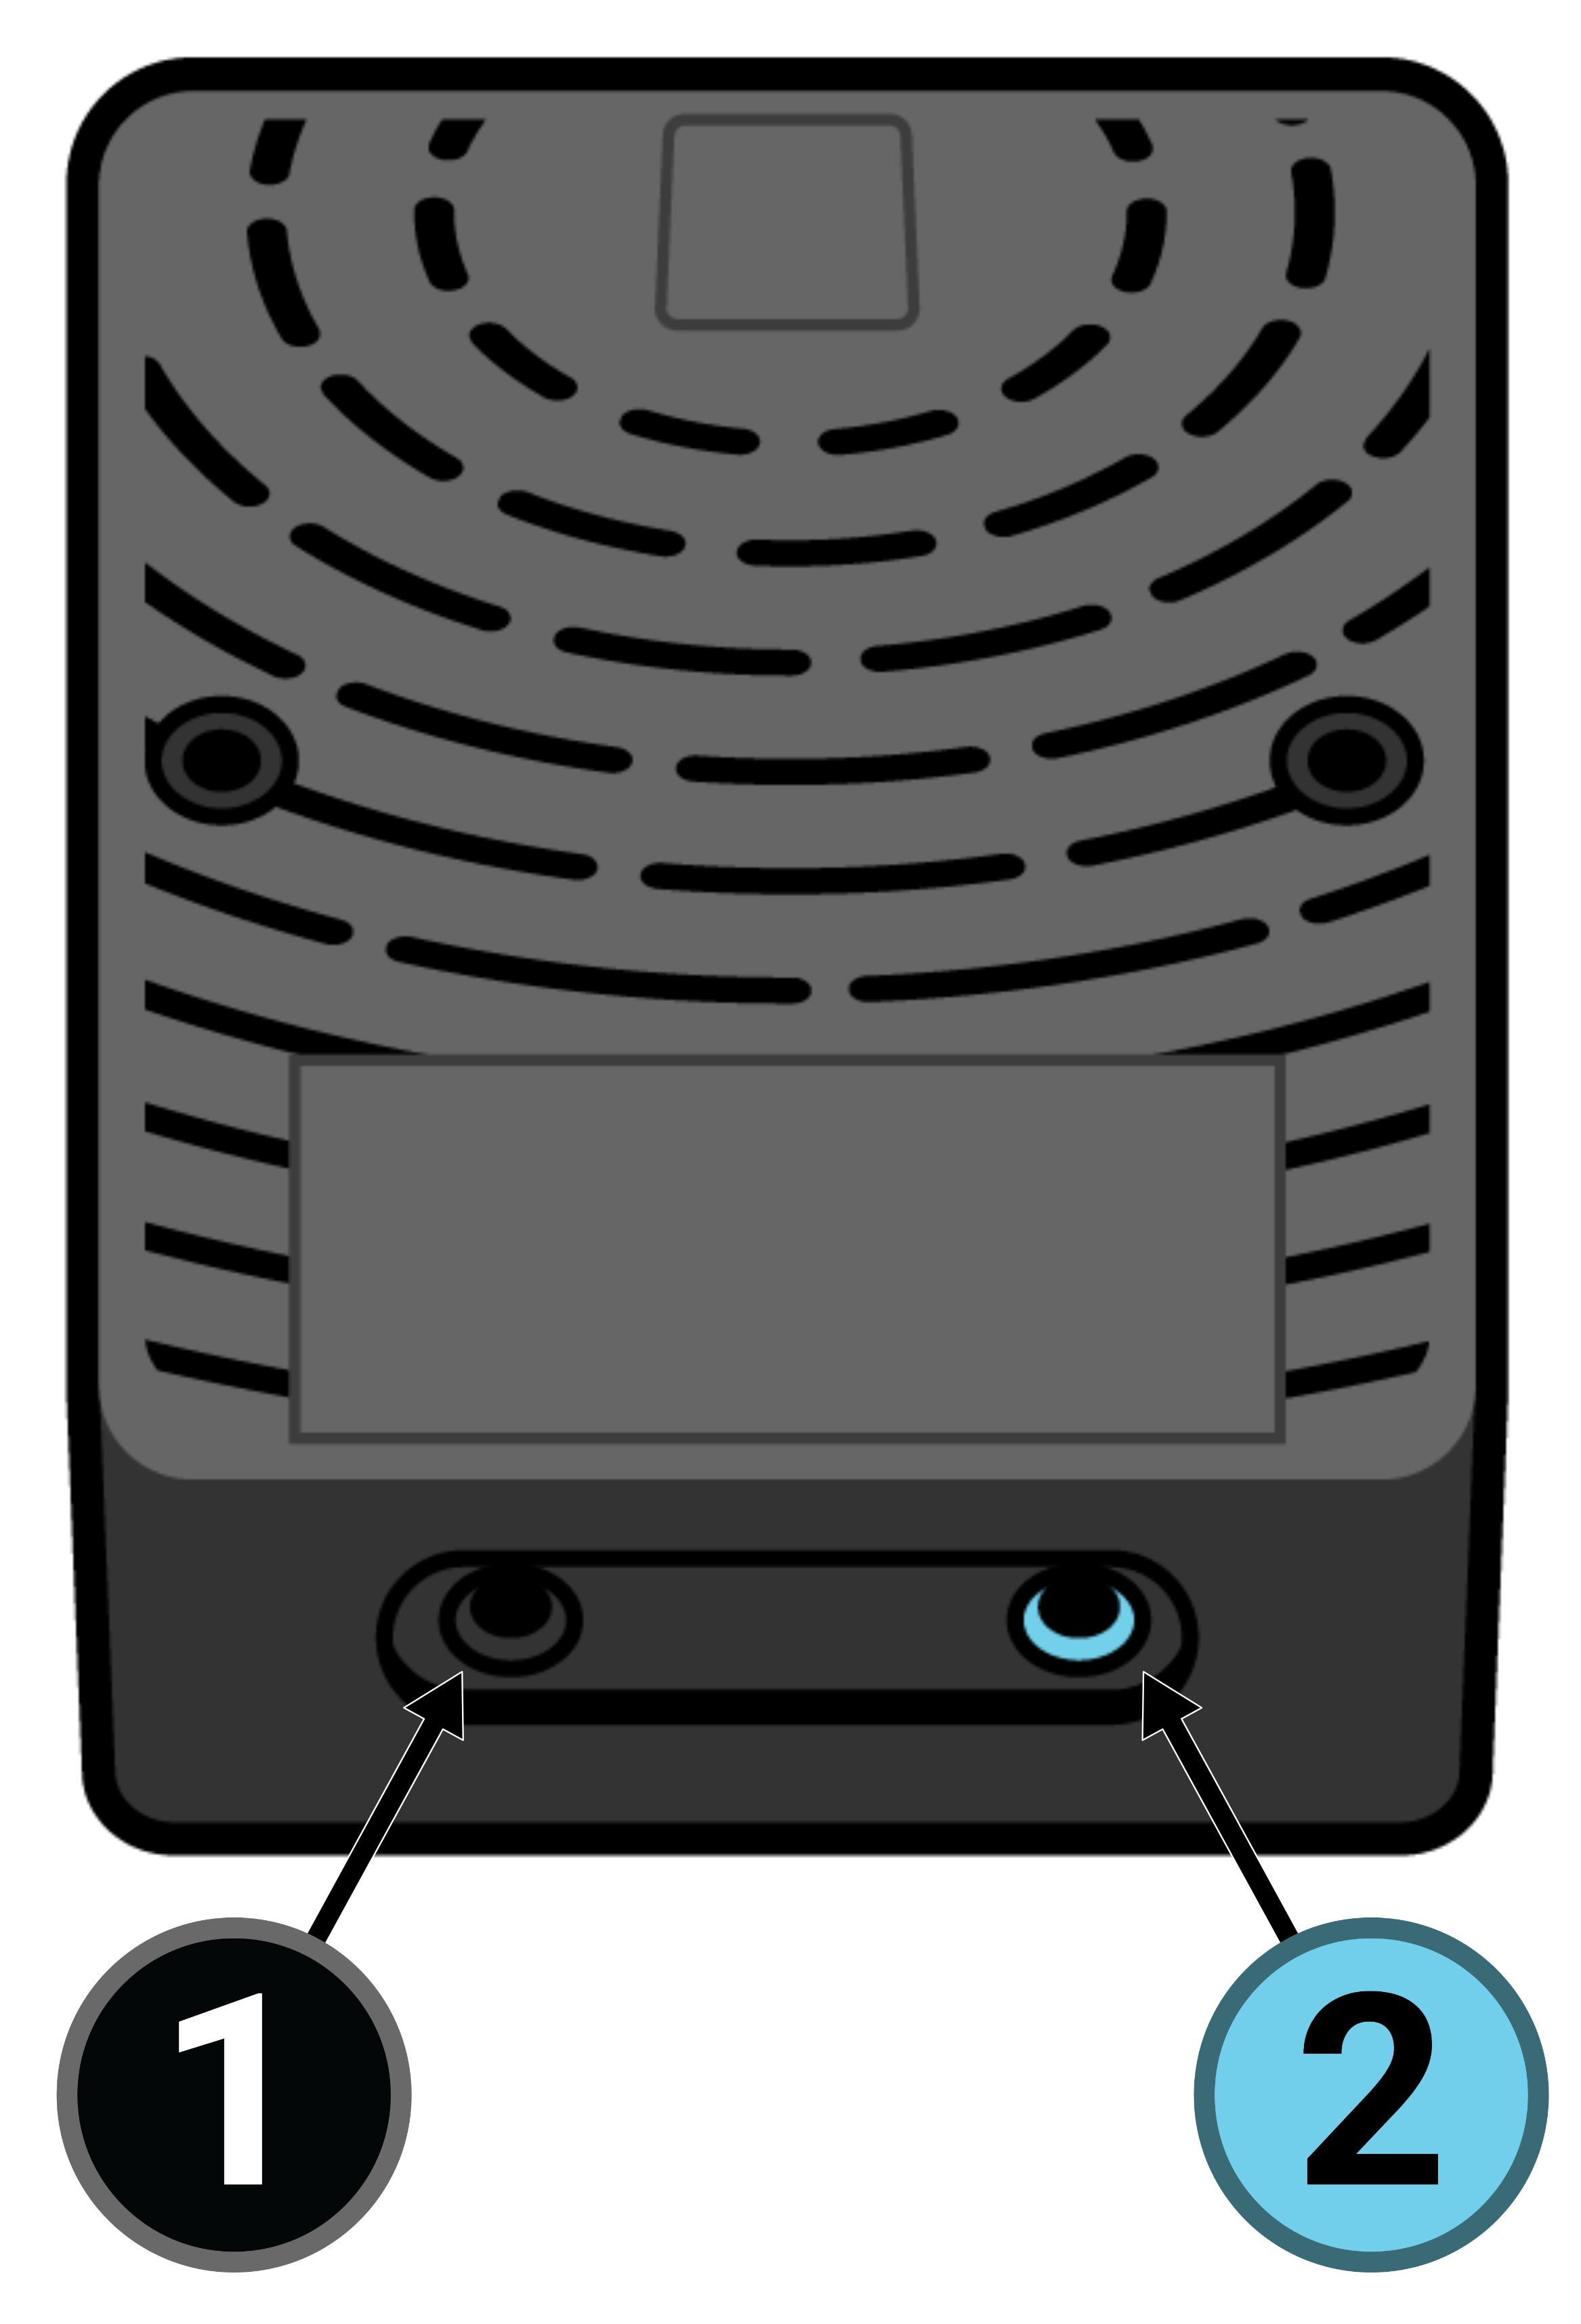 A top-down view of a black Sleeptracker-AI processor, oriented with its USB cable pointing up, with the circular vents facing towards the viewer. To the left is a small black circular port, labeled 